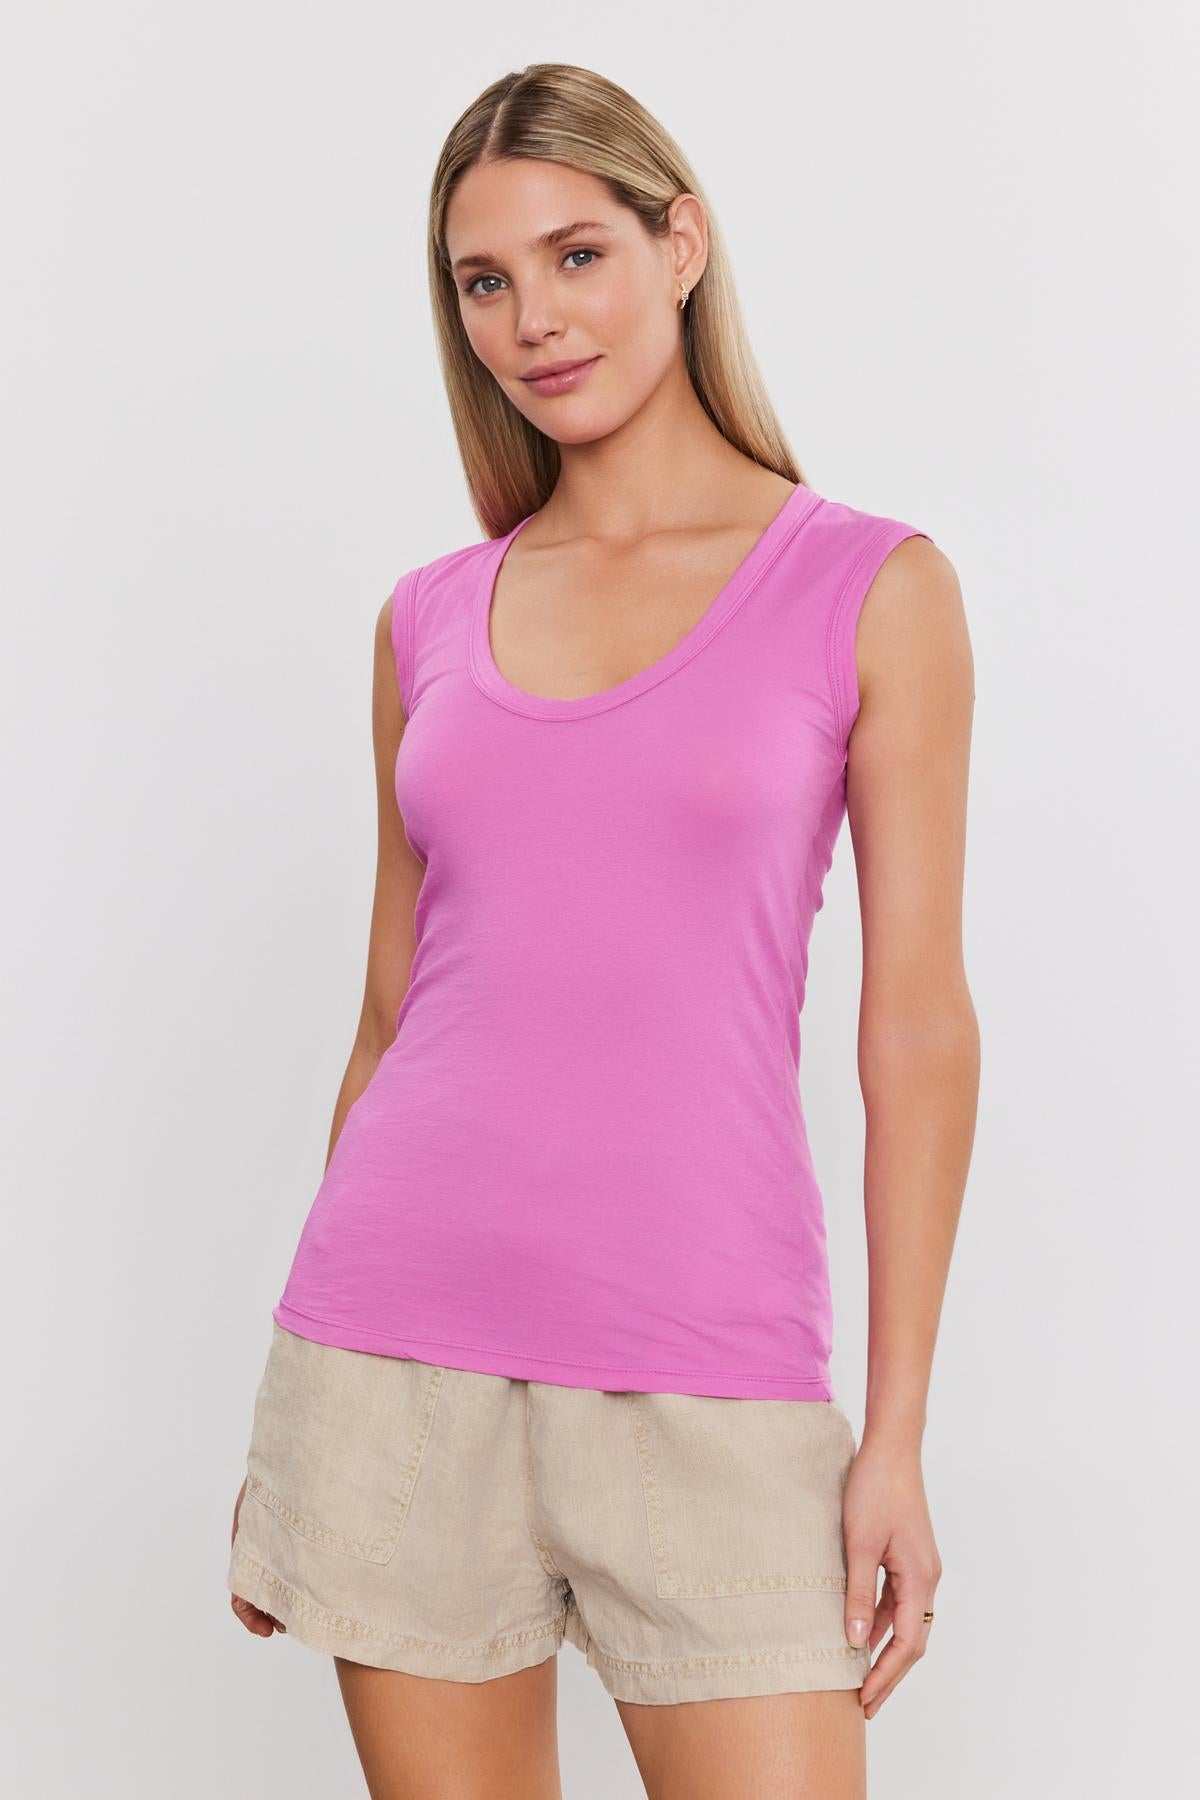 A woman wearing a bright pink ESTINA TANK TOP by Velvet by Graham & Spencer paired with beige shorts stands against a plain background.-37575445184705